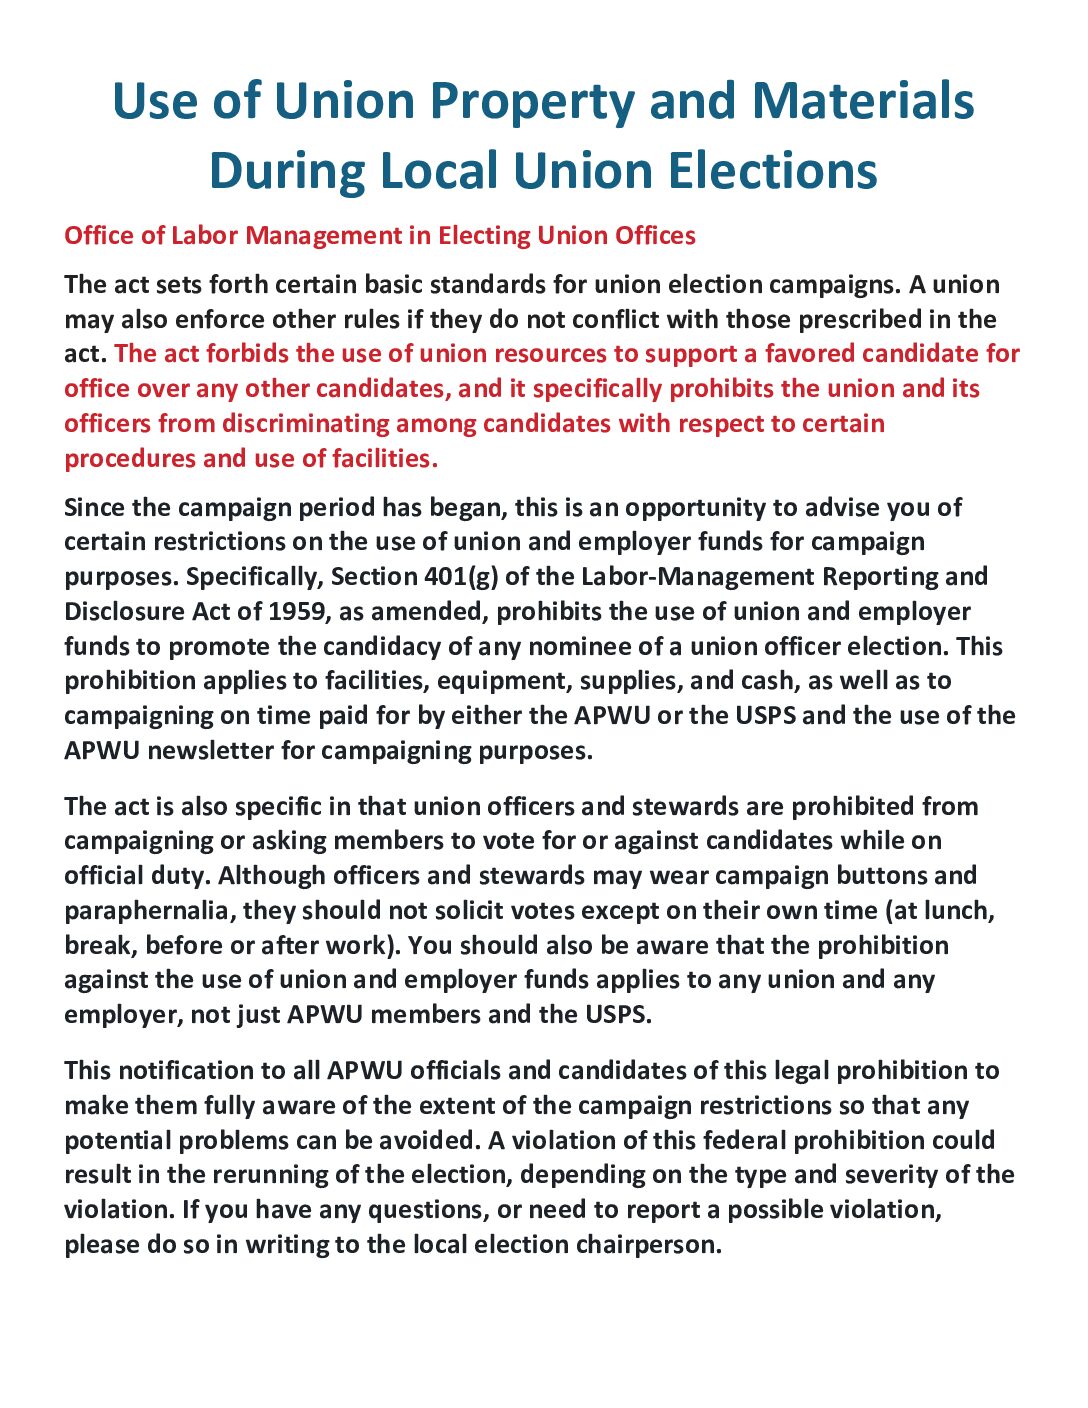 Election Prohibition Concerning Using Employer Funds - 